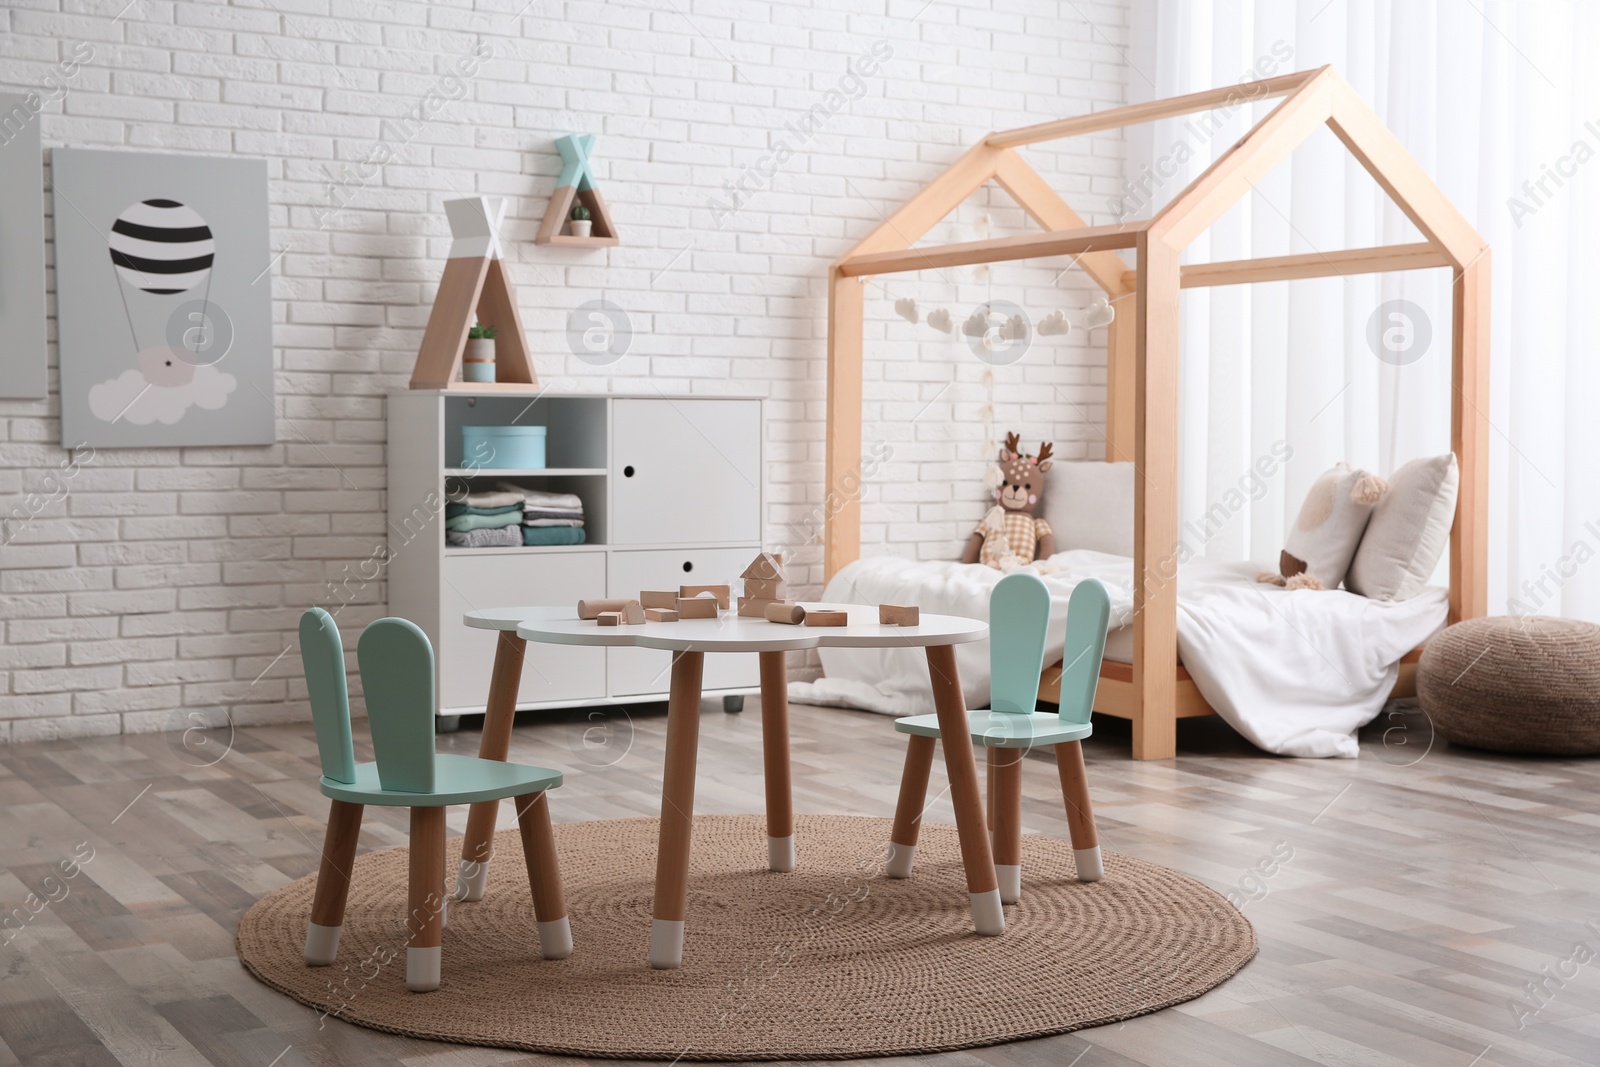 Photo of Cute children's room interior with bed and little table